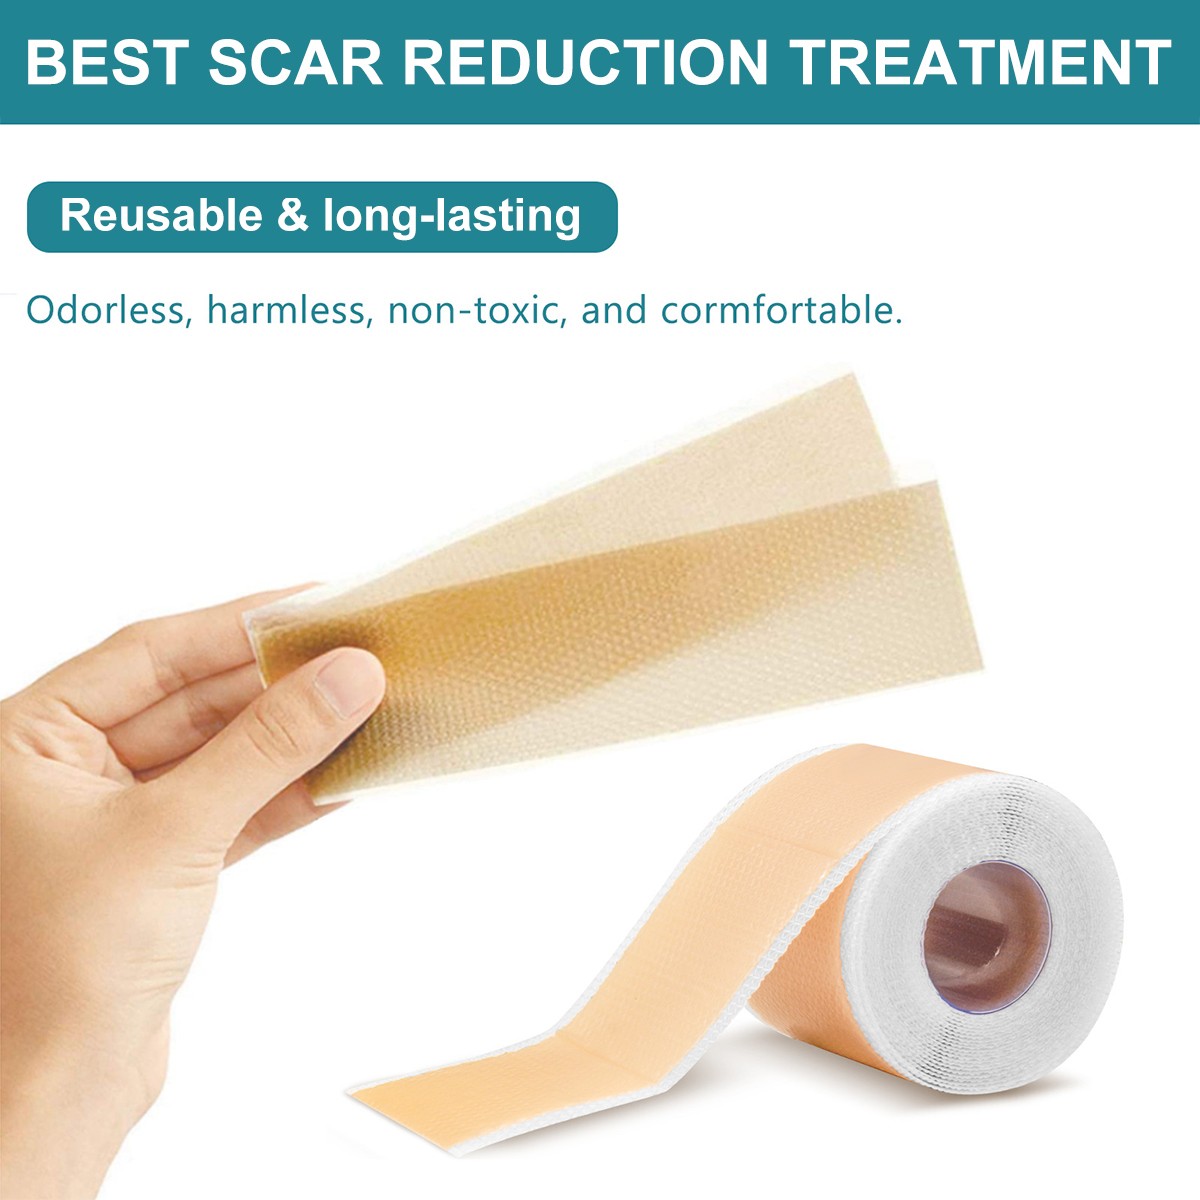 Scar Removal Patch Medical Grade Self Adhesive Silicone Scar Patch for Trauma Surgery Acne Burn Skin Repair Scar Treatment Patch